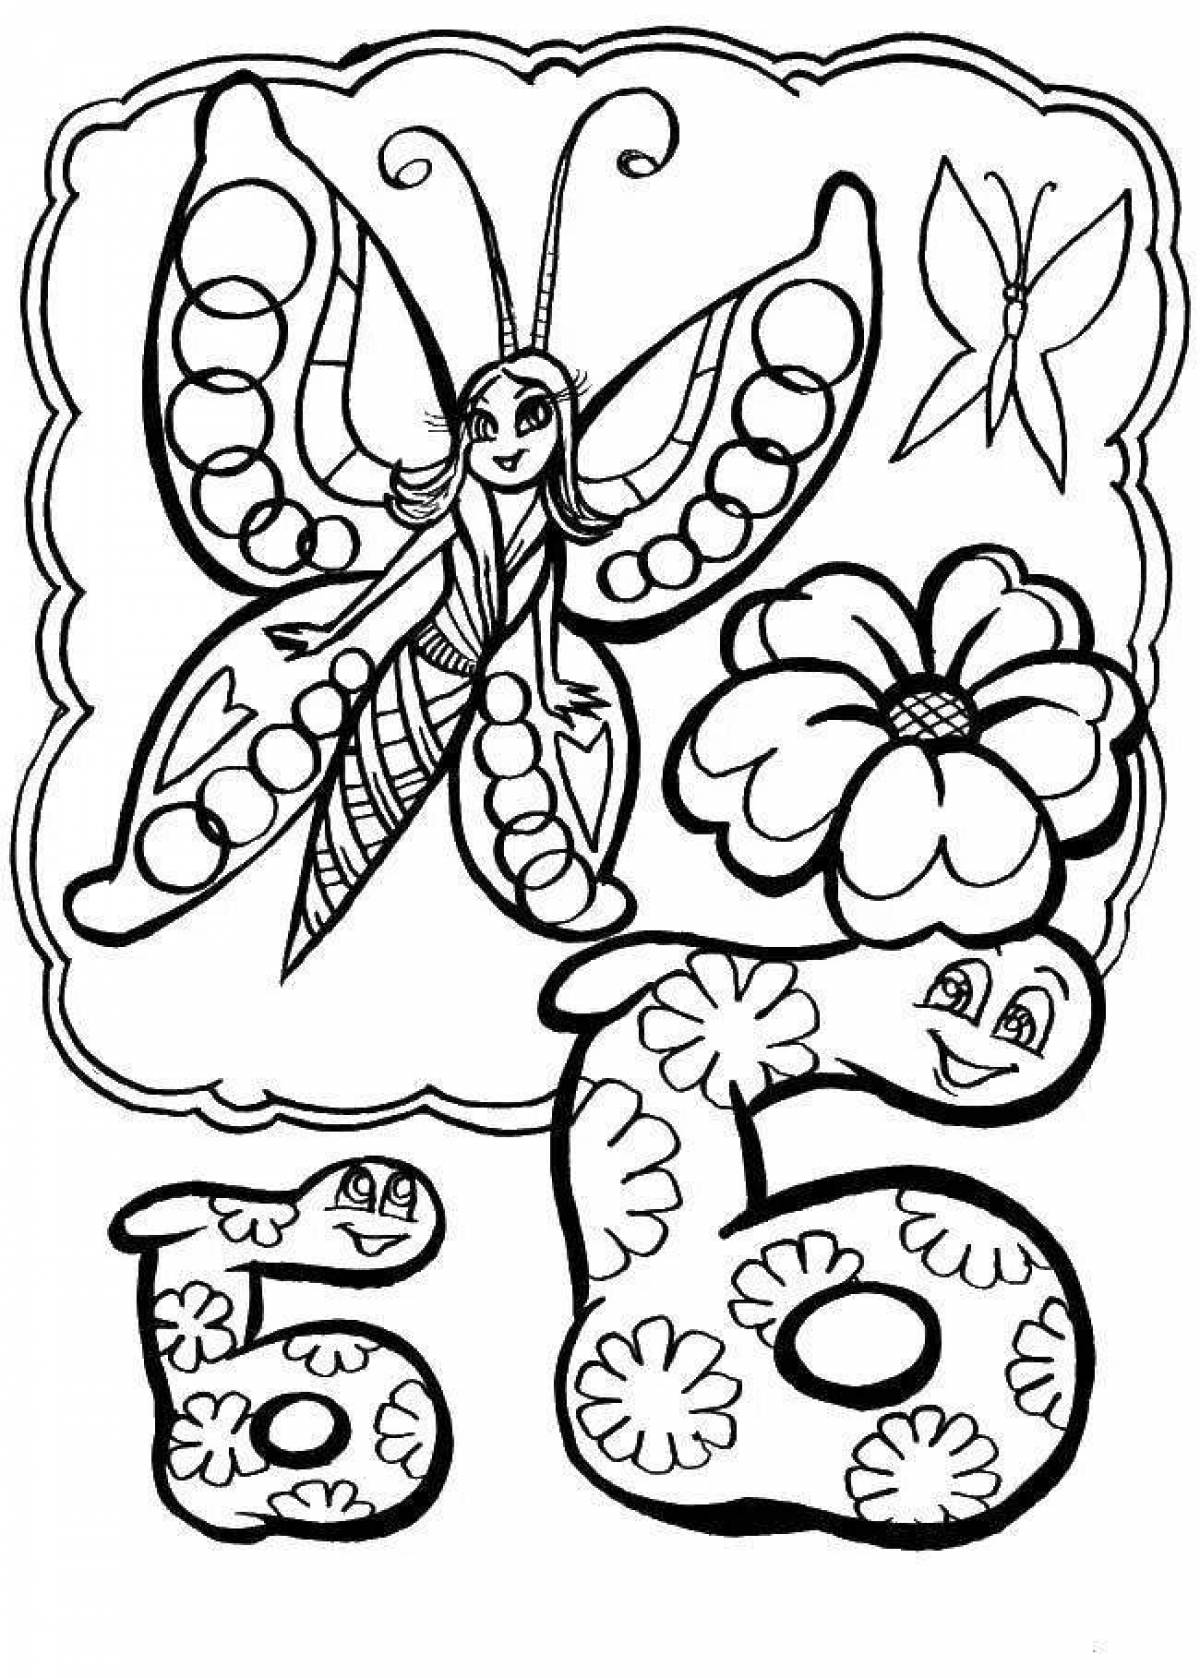 Witty live alphabet coloring book